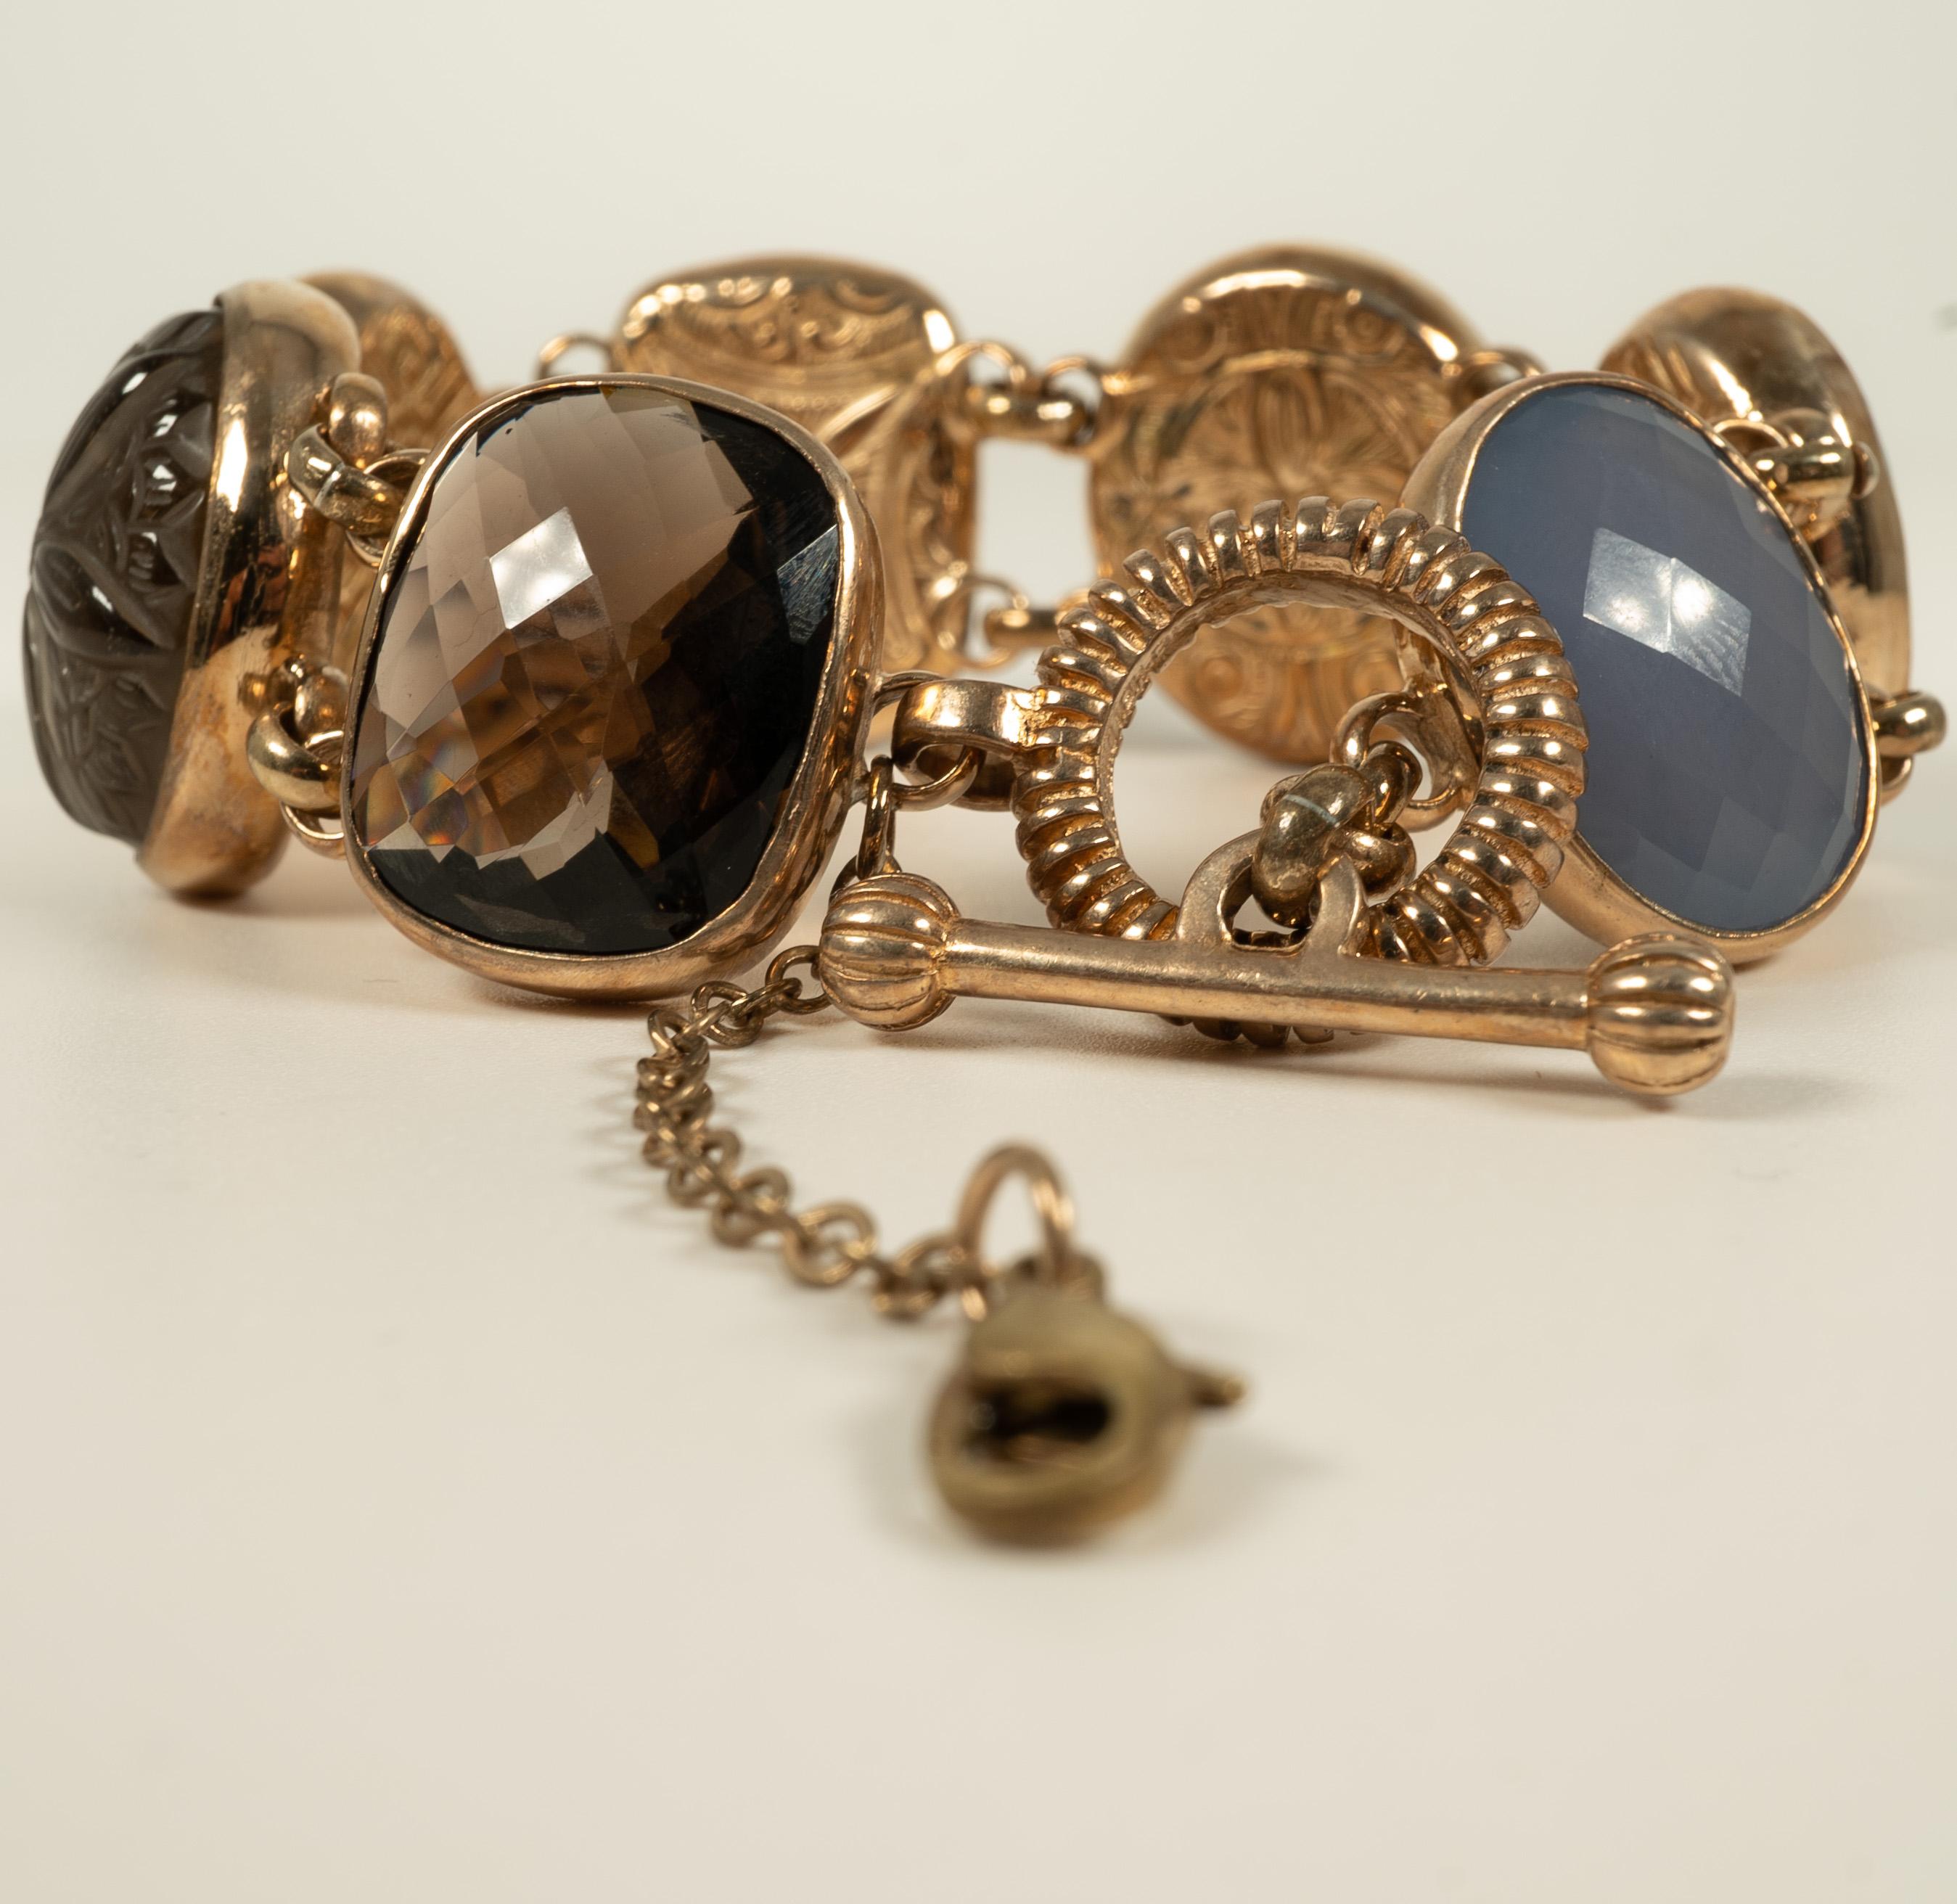 By jewelry designer Stephen Dweck, this brass, quartz and cameo bracelet is secured with a toggle clasp and safety chain.